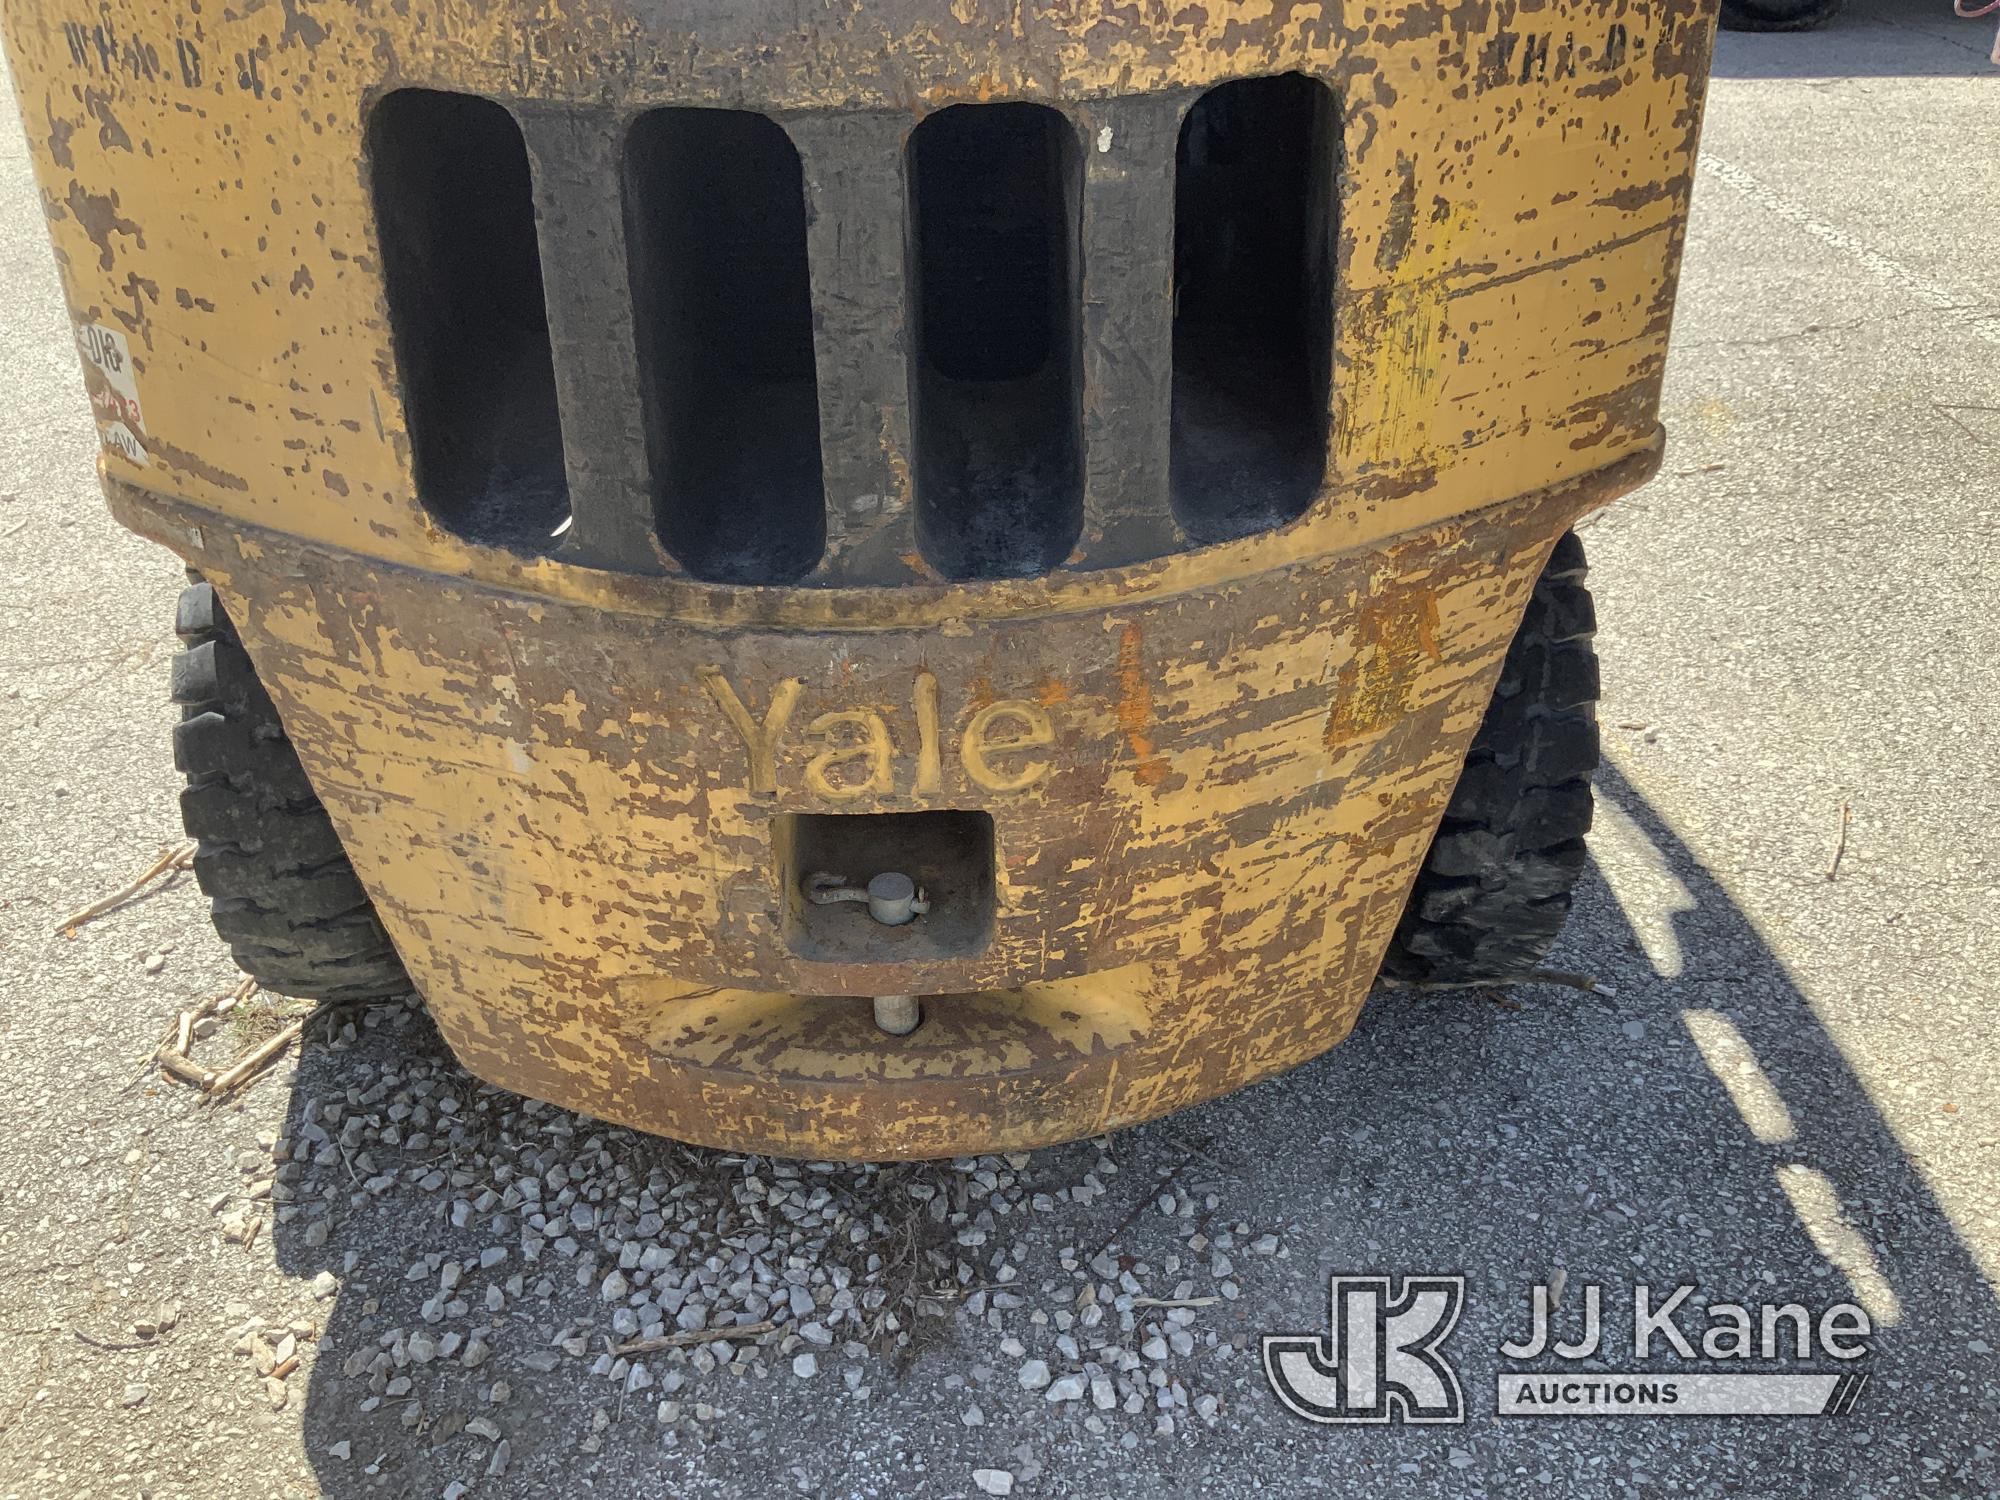 (Kansas City, MO) 1986 Yale GDP050 Solid Tired Forklift Not Running, Condition Unknown